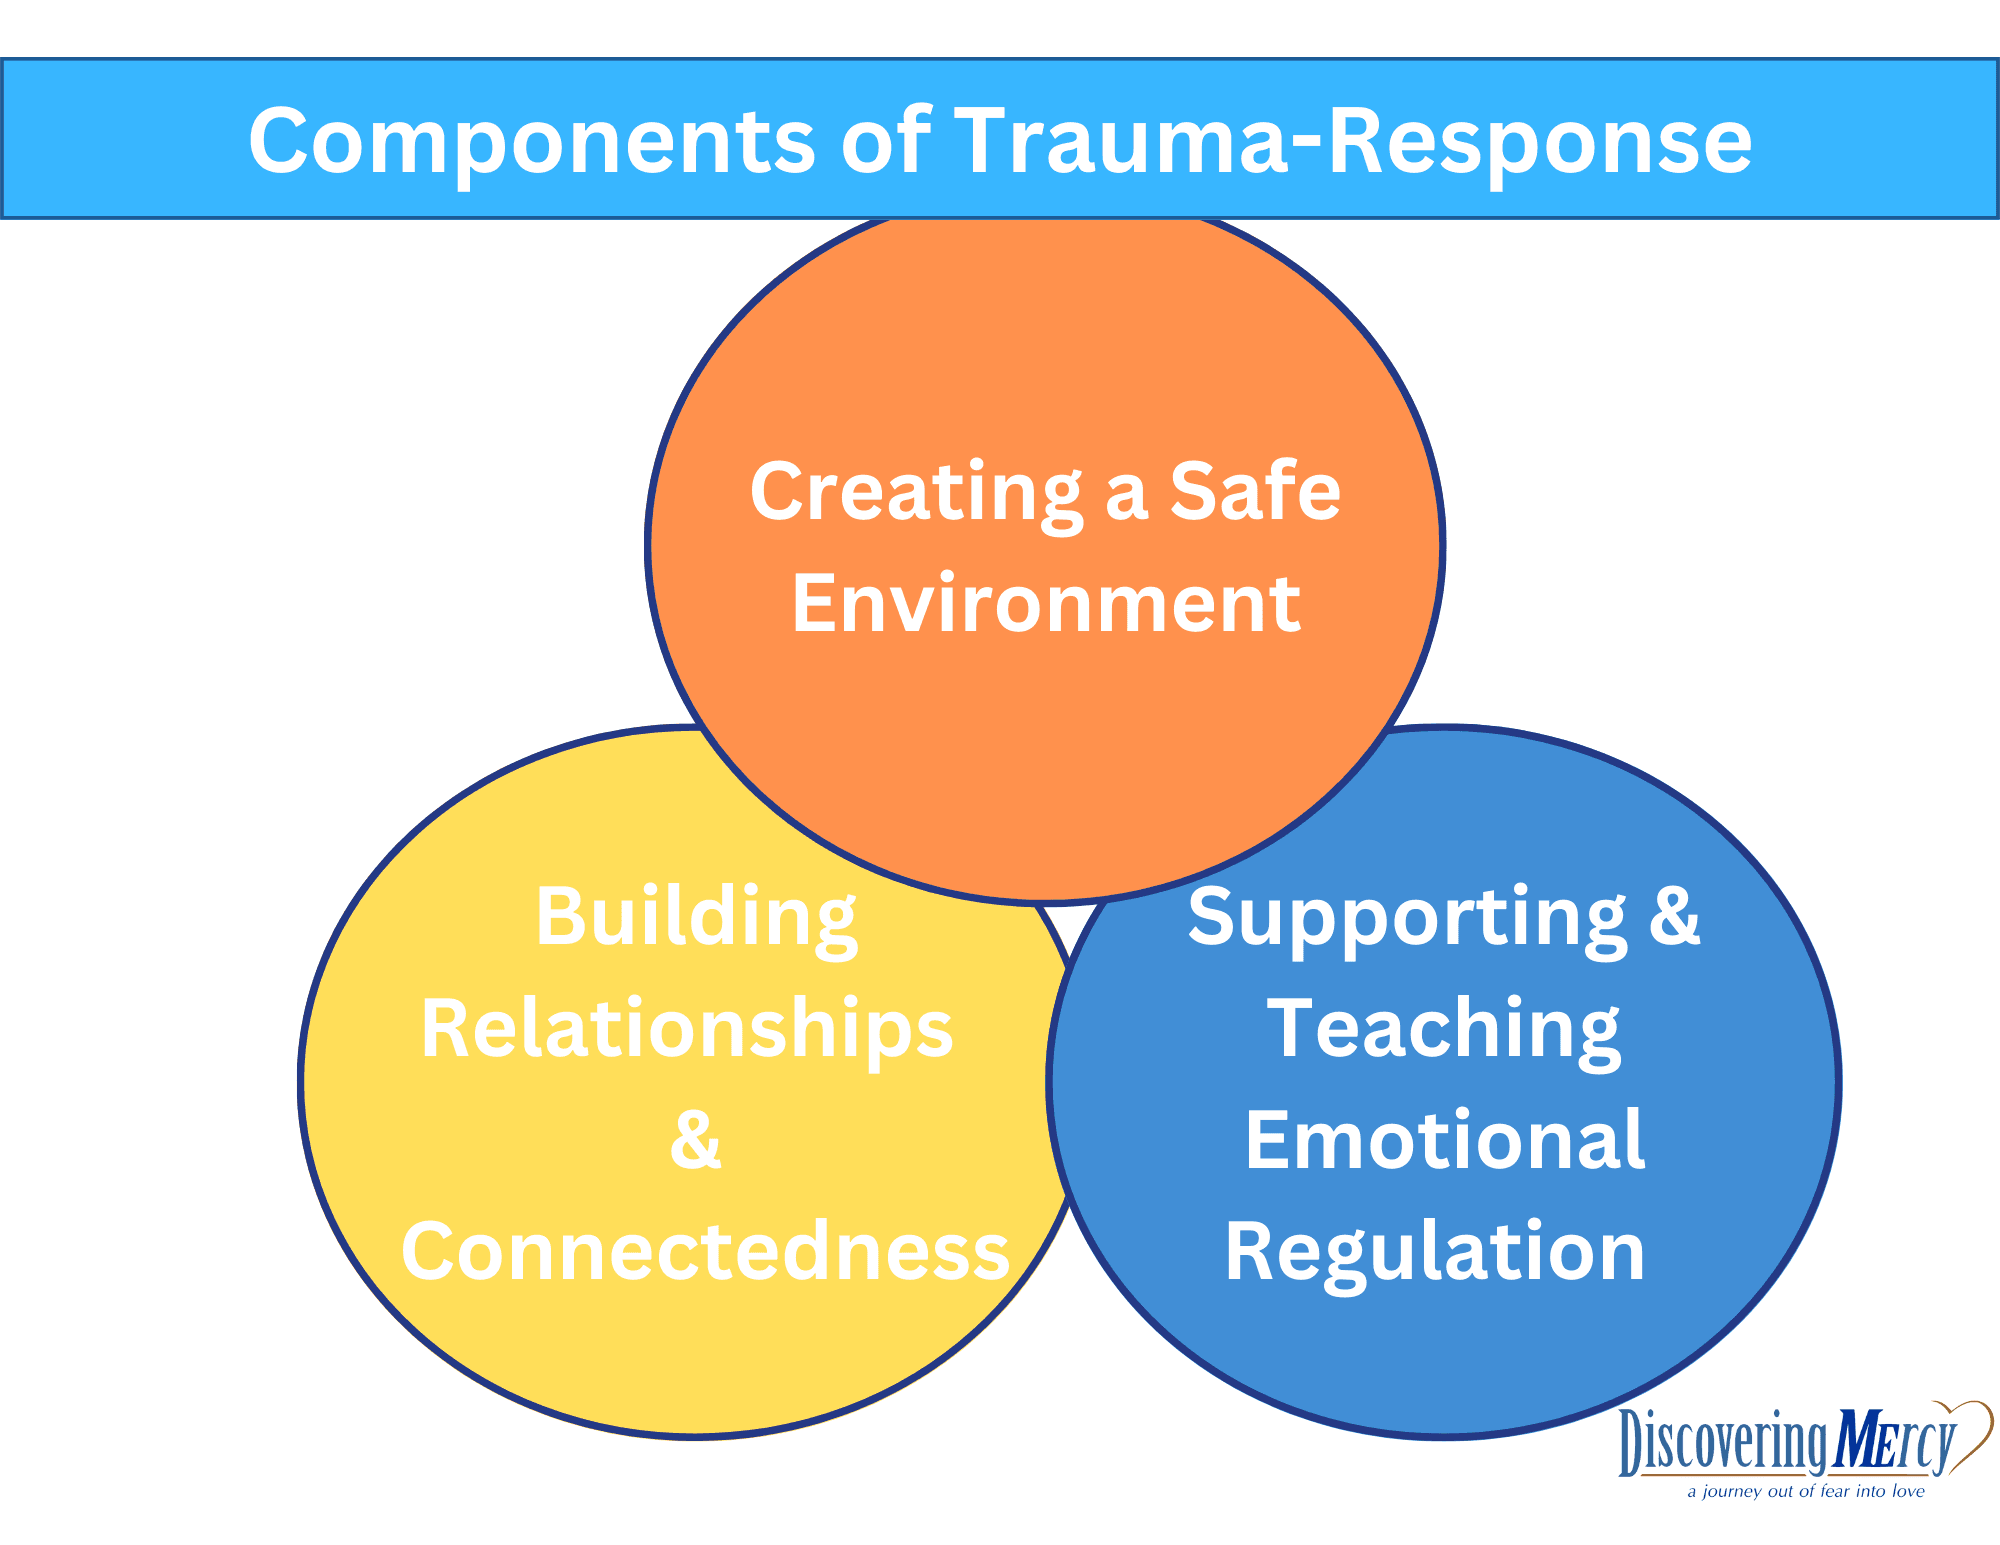 Discovering MErcy-Components of Trauma-Informed Care Graphic